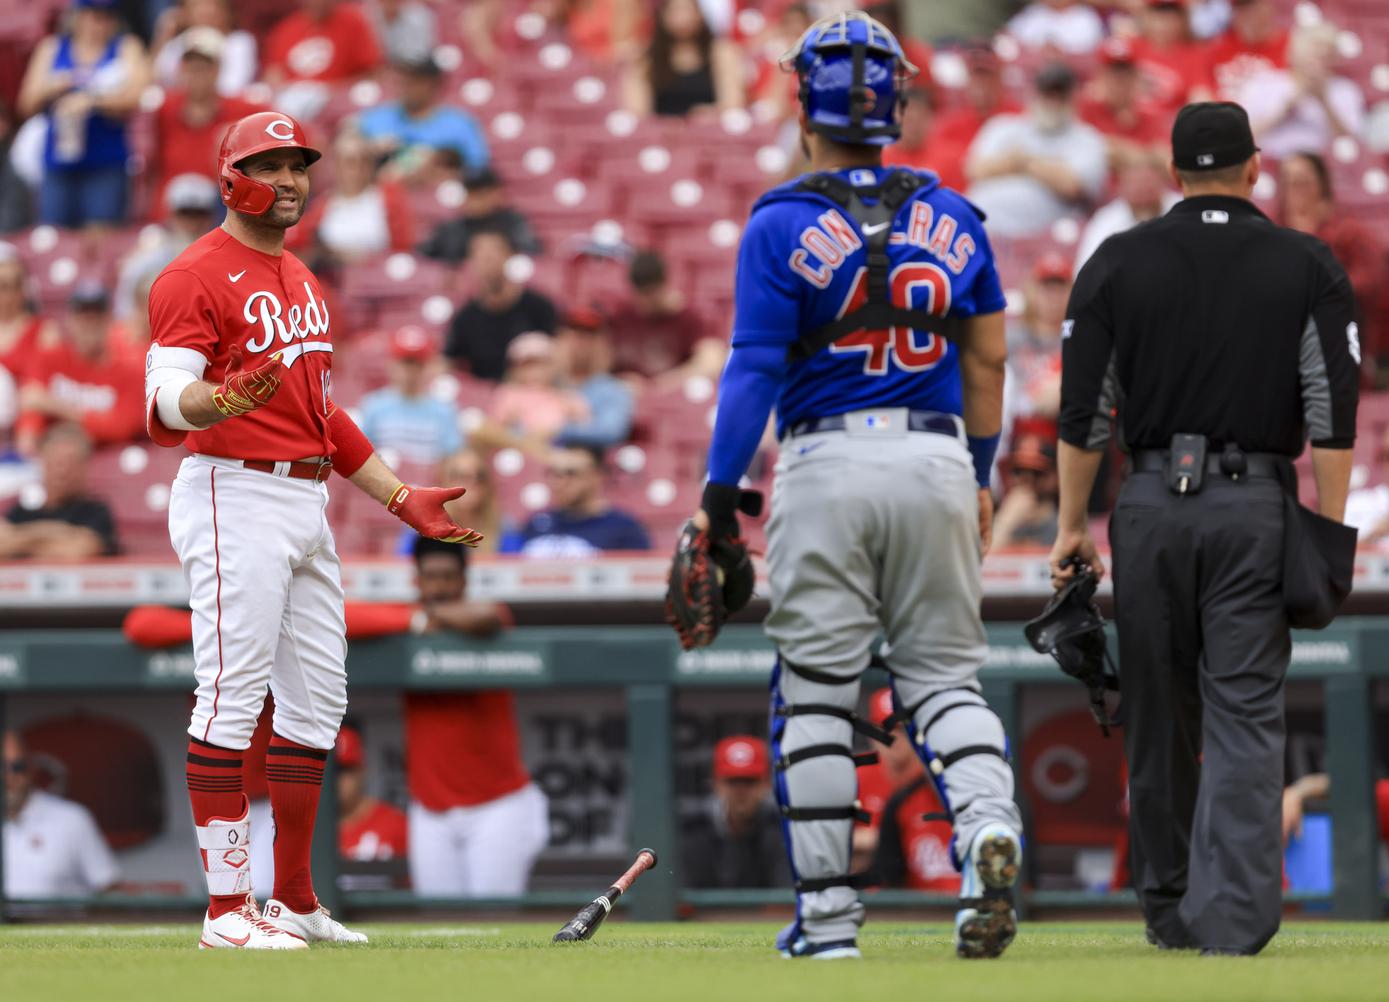 Mlb Reds Wallop Cubs 20 5 As Feud Simmers